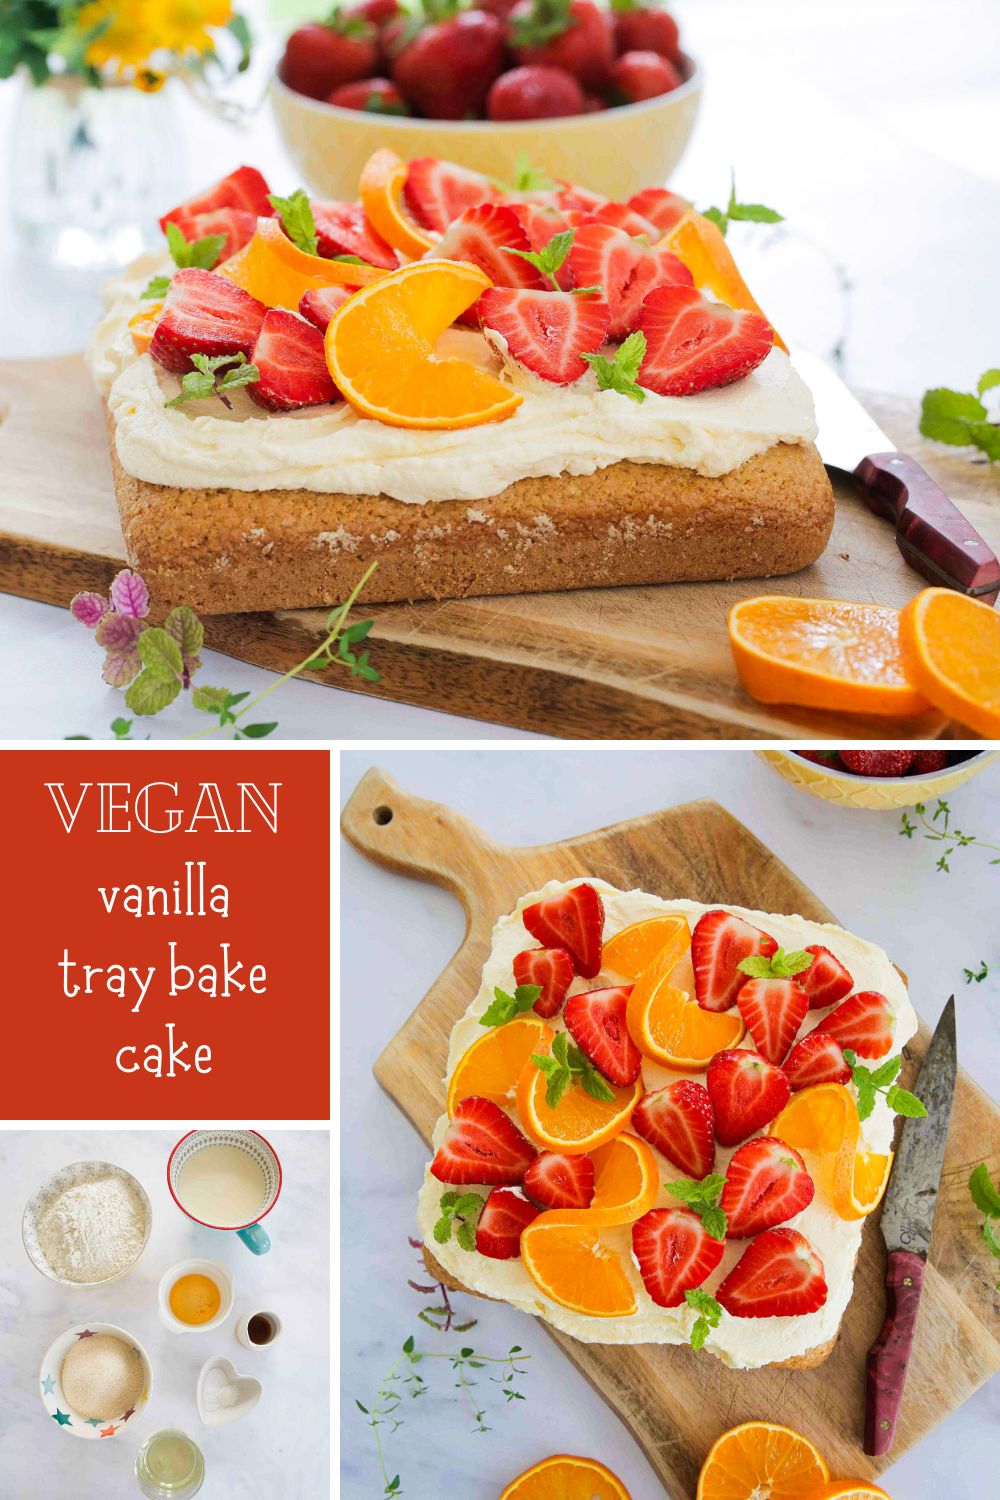 Soft and fluffy vegan vanilla sheet cake or tray bake is an easy buttery sponge, topped with whipped icing and fresh fruit. Perfect for birthdays, afternoon tea or simply because! Recipe on thecookandhim.com #vanillacake #vegancake #veganvanillacake #birthdaycake #sheetcake #traybakecake #veganfrosting